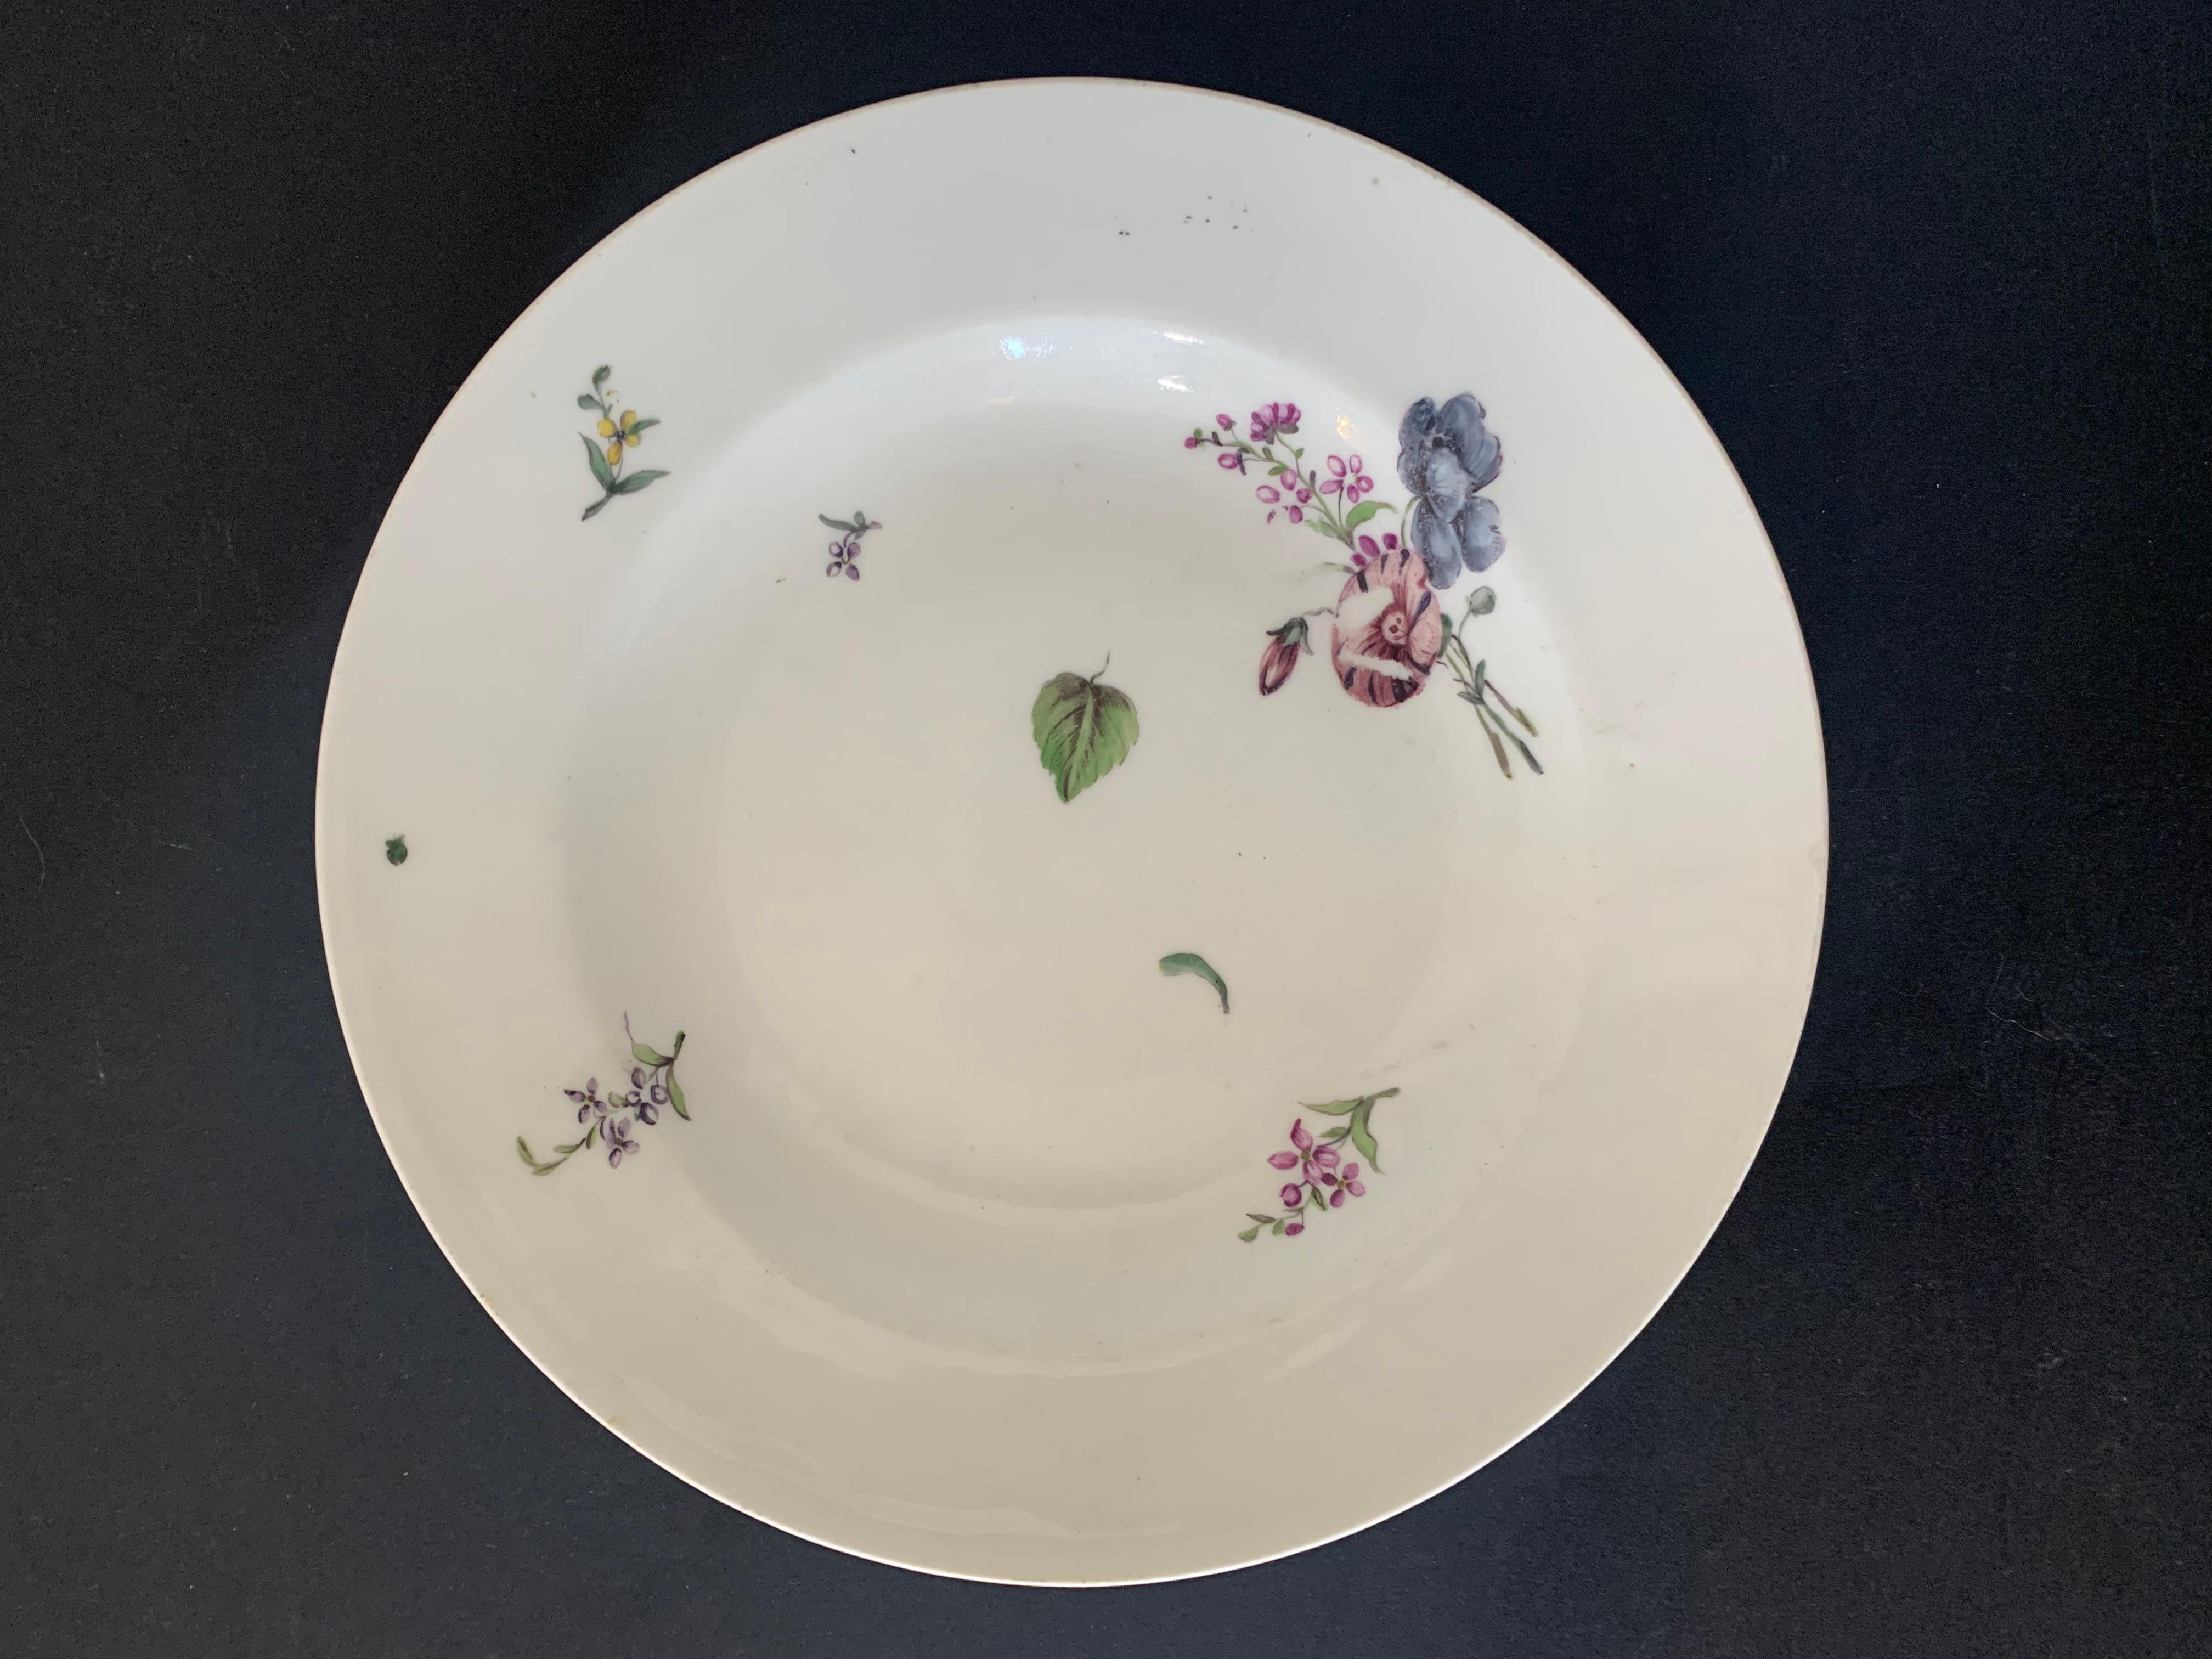 Beautiful small white porcelain plate decorated with different flowers such as petunias and phlox. Leaves seem to fly. A small plum is hidden on the back of the plate. We discover a work of extreme finesse. The lines are very fine and delicate.